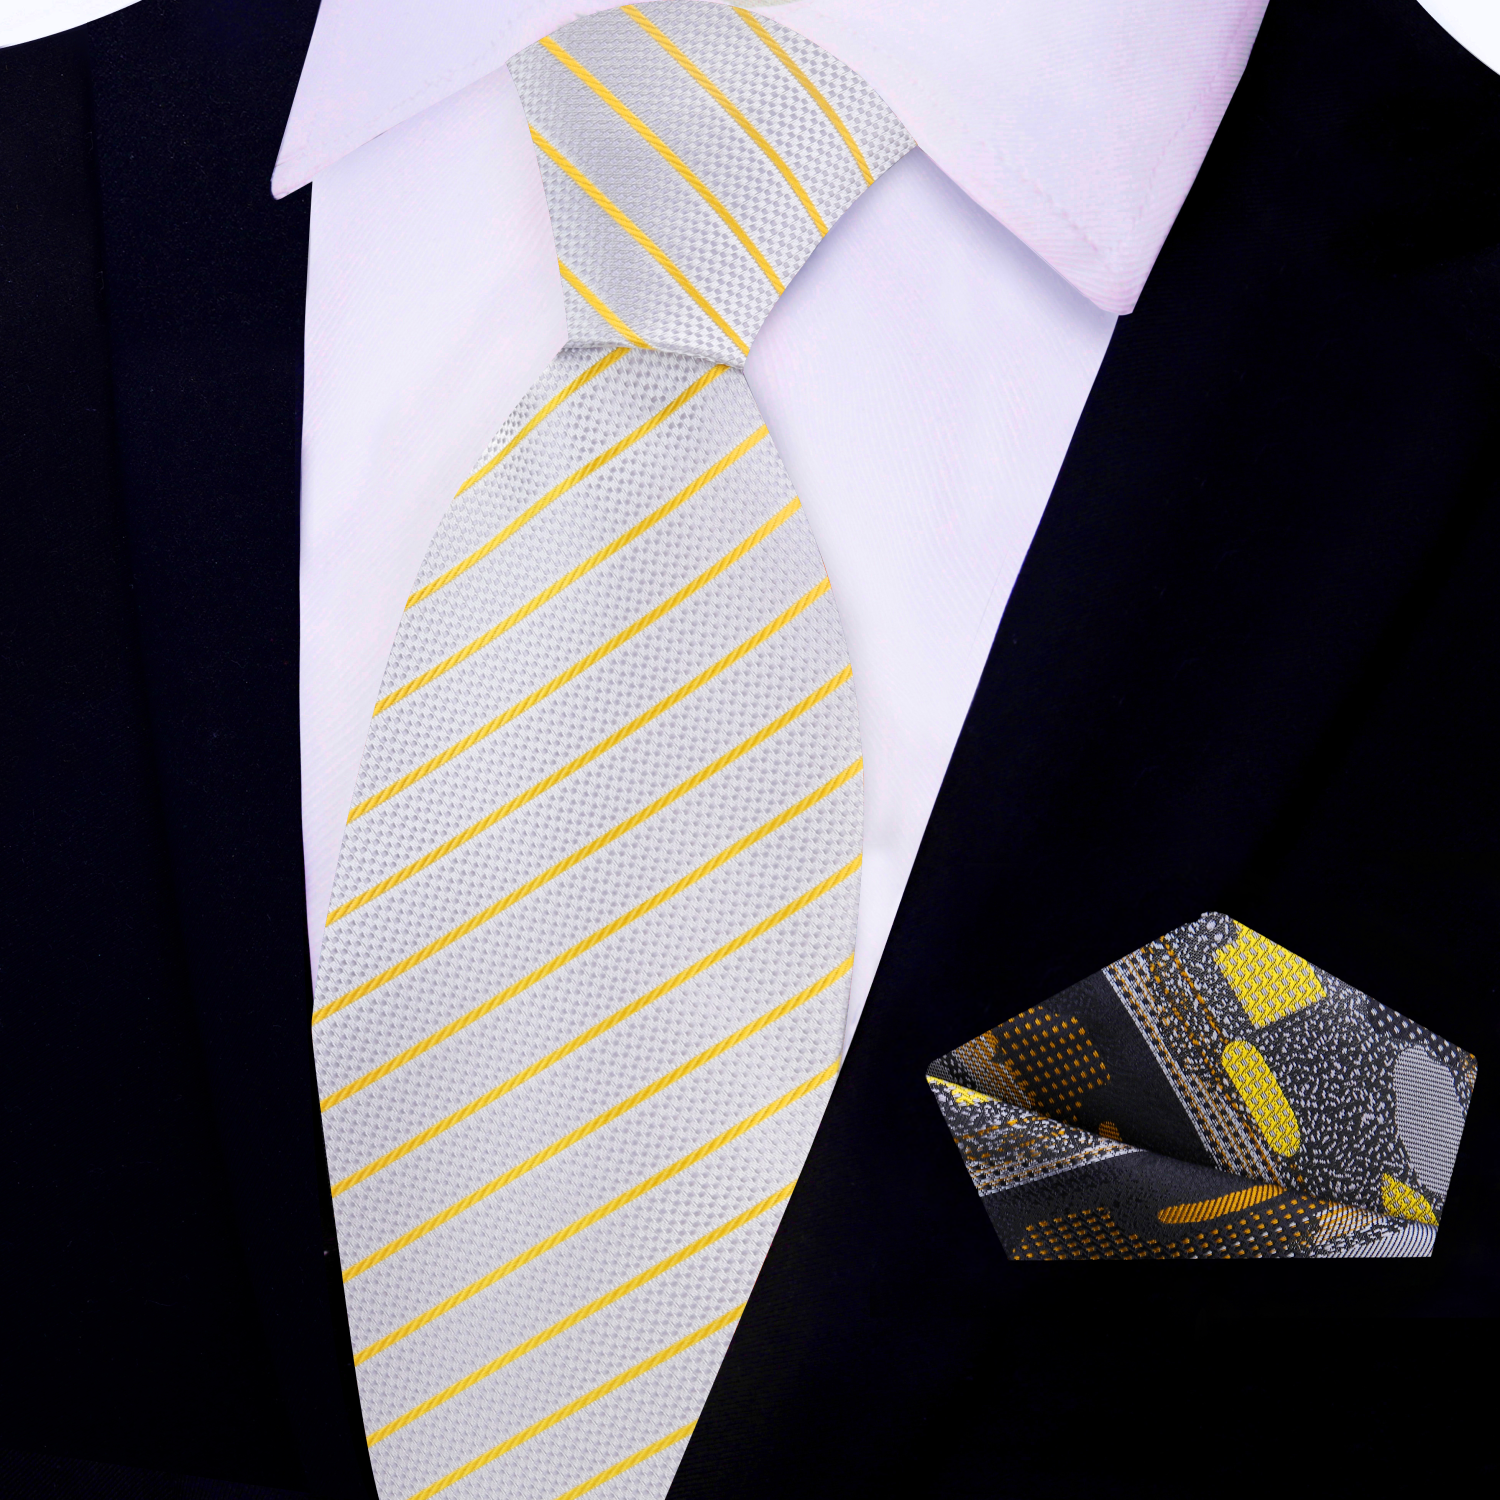 View 2: Silver and Gold Pinstripe Necktie and Abstract Square